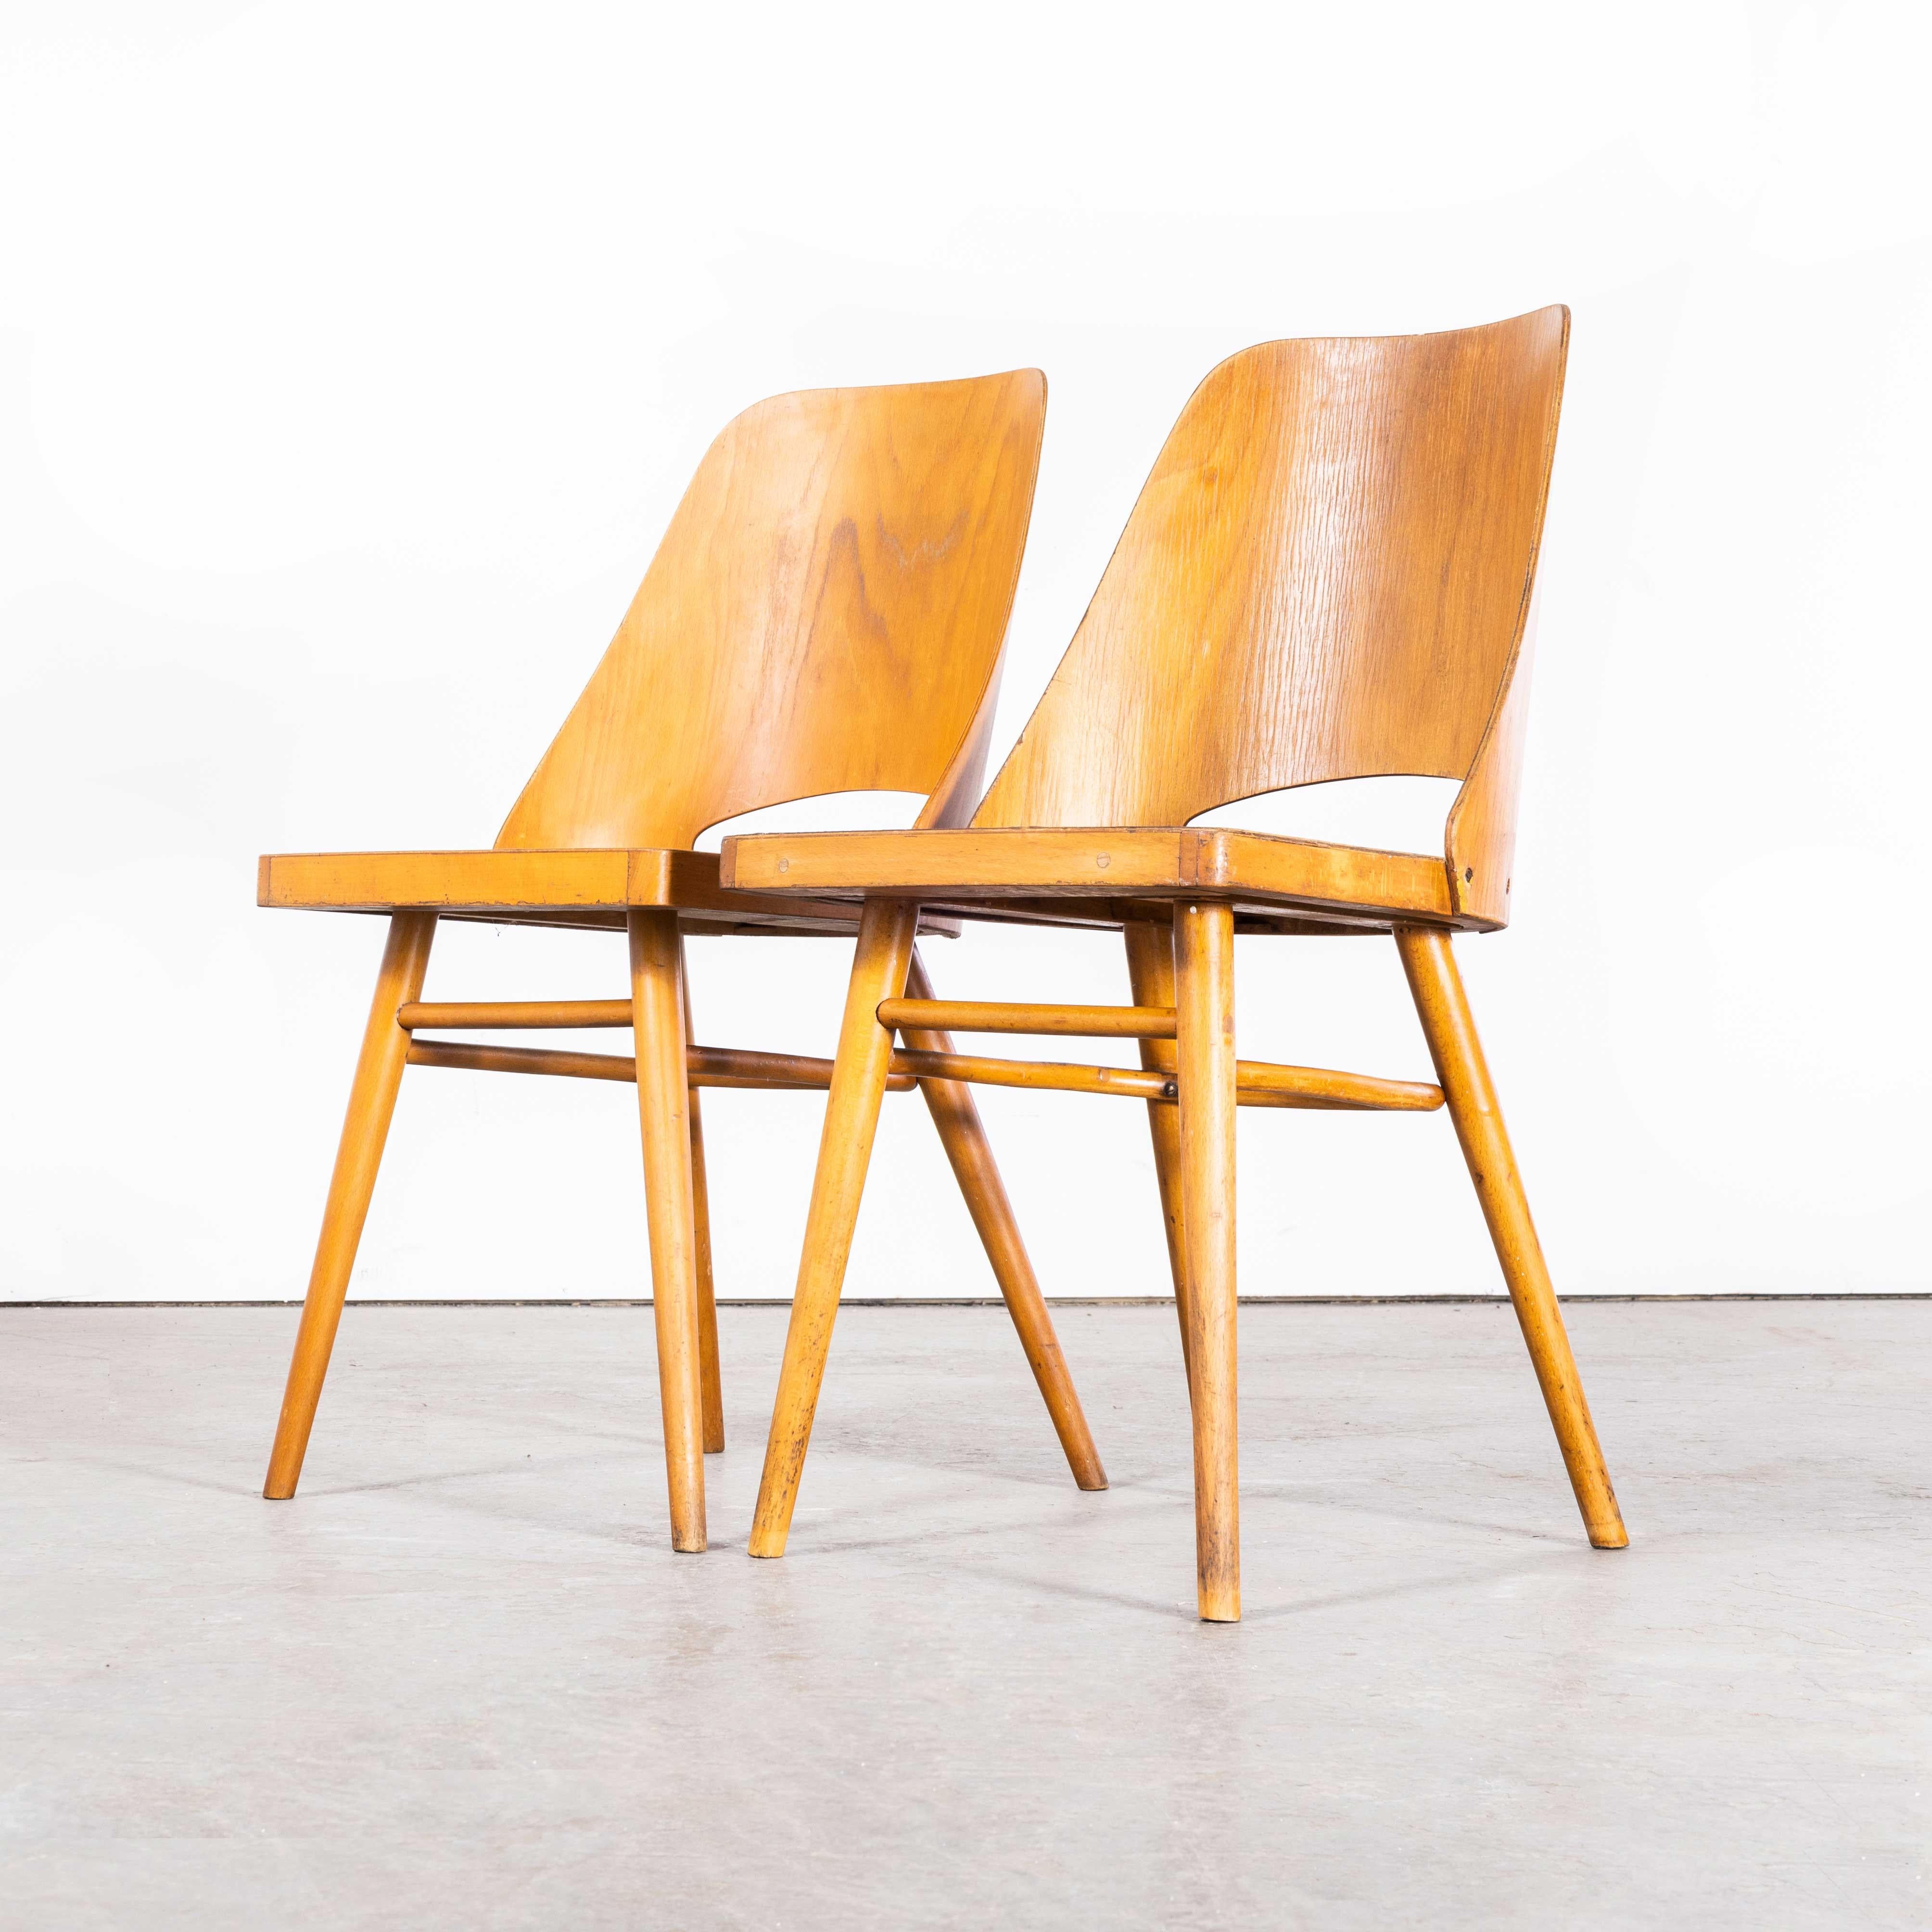 1950's Honey Beech Dining Chairs By Radomir Hoffman For Ton - Pair For Sale 3